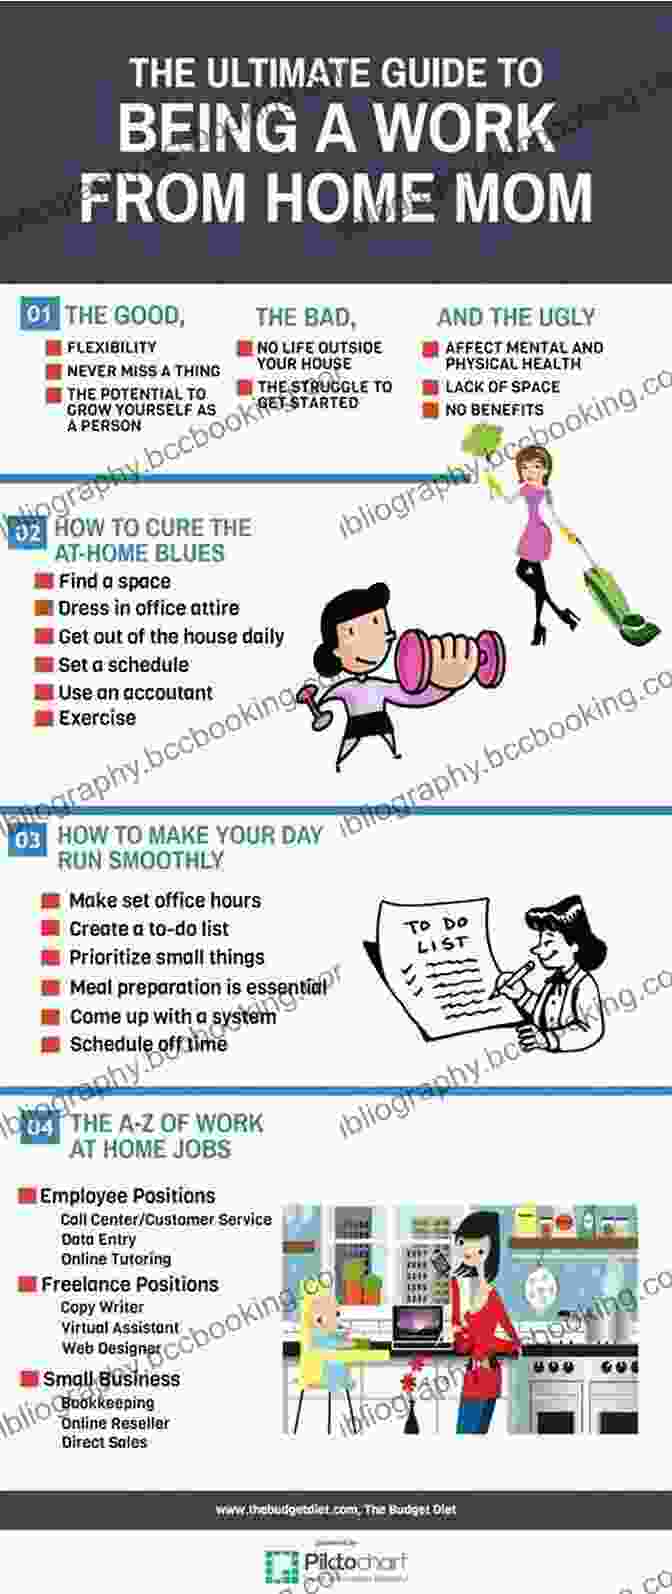 Image Showing A Variety Of Work From Home Options 10 HIGHEST PAYING WORK AT HOME JOBS: MAKE $15 $30 PER HOUR WORKING AT HOME JOBS OPPORTUNITY FROM HOME